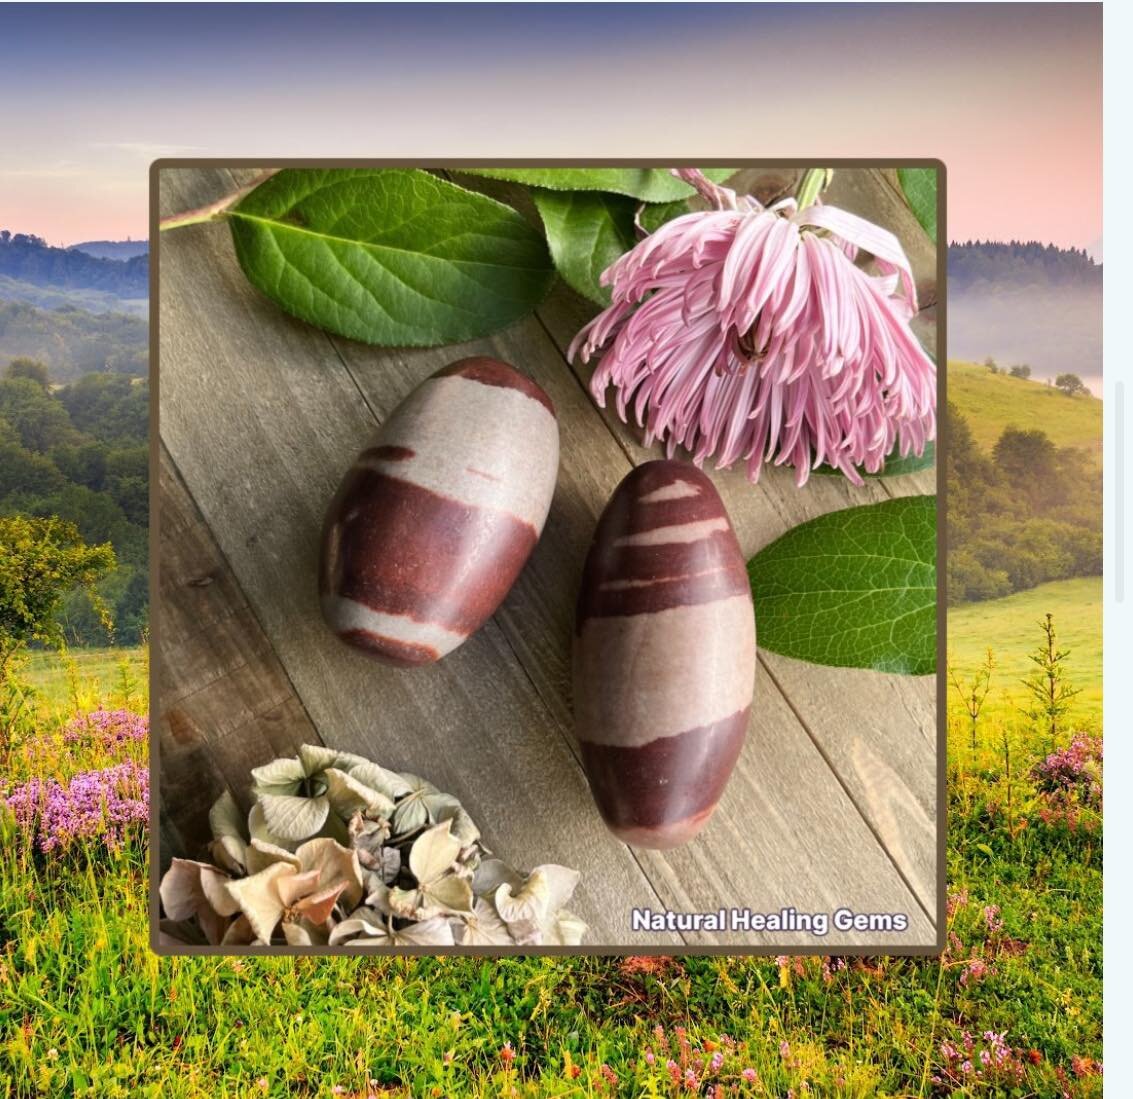 These stones are called Shiva Lingam eggs. They bring yin/yang balance, spiritual expansion, enlightenment, and creativity. 

https://www.naturalhealinggems.com/gems/shiva-lingam-egg

#shivalingam #shivalingamstone #naturalhealingems #gemstone #heali